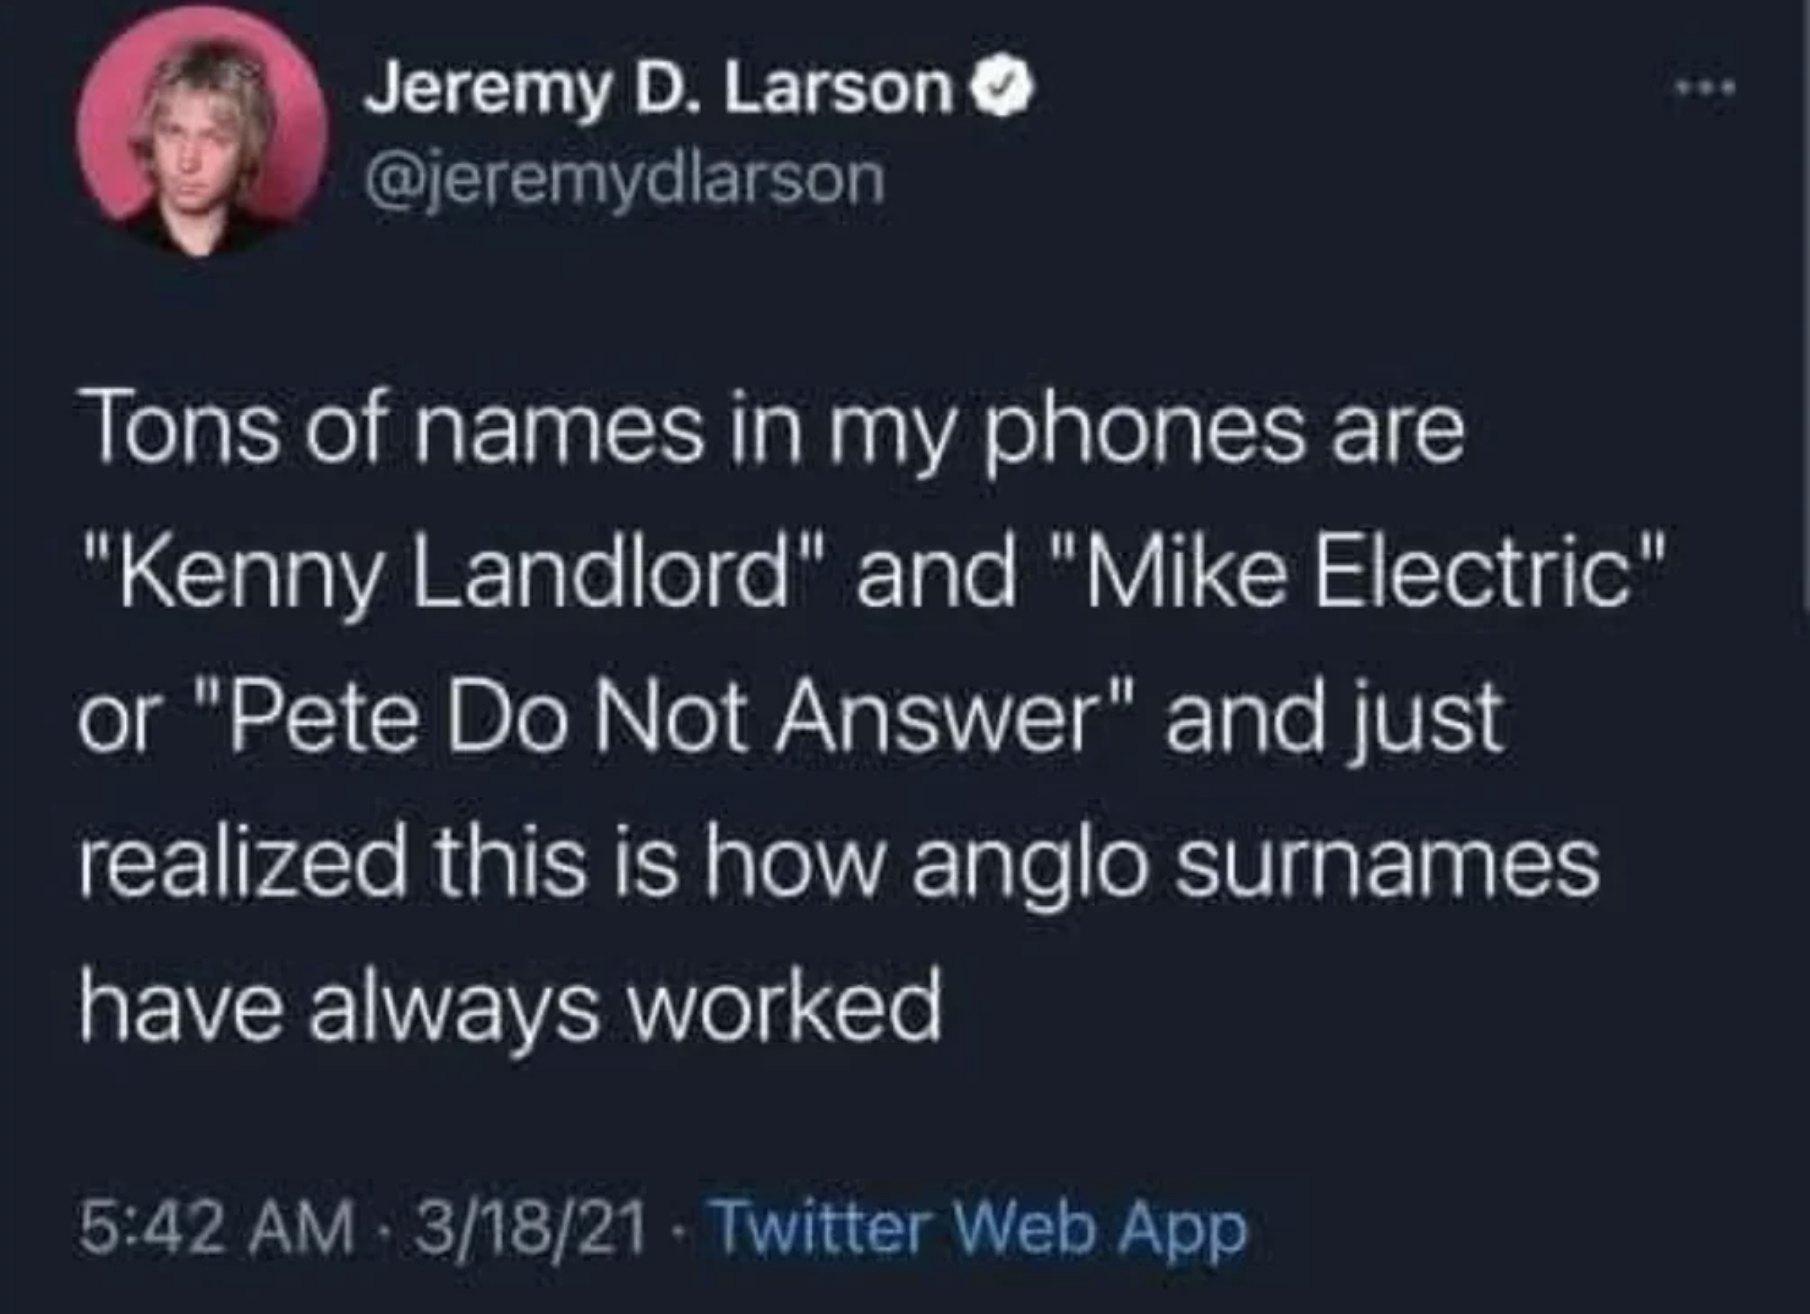 screenshot - Jeremy D. Larson Tons of names in my phones are "Kenny Landlord" and "Mike Electric" or "Pete Do Not Answer" and just realized this is how anglo surnames have always worked 31821 Twitter Web App